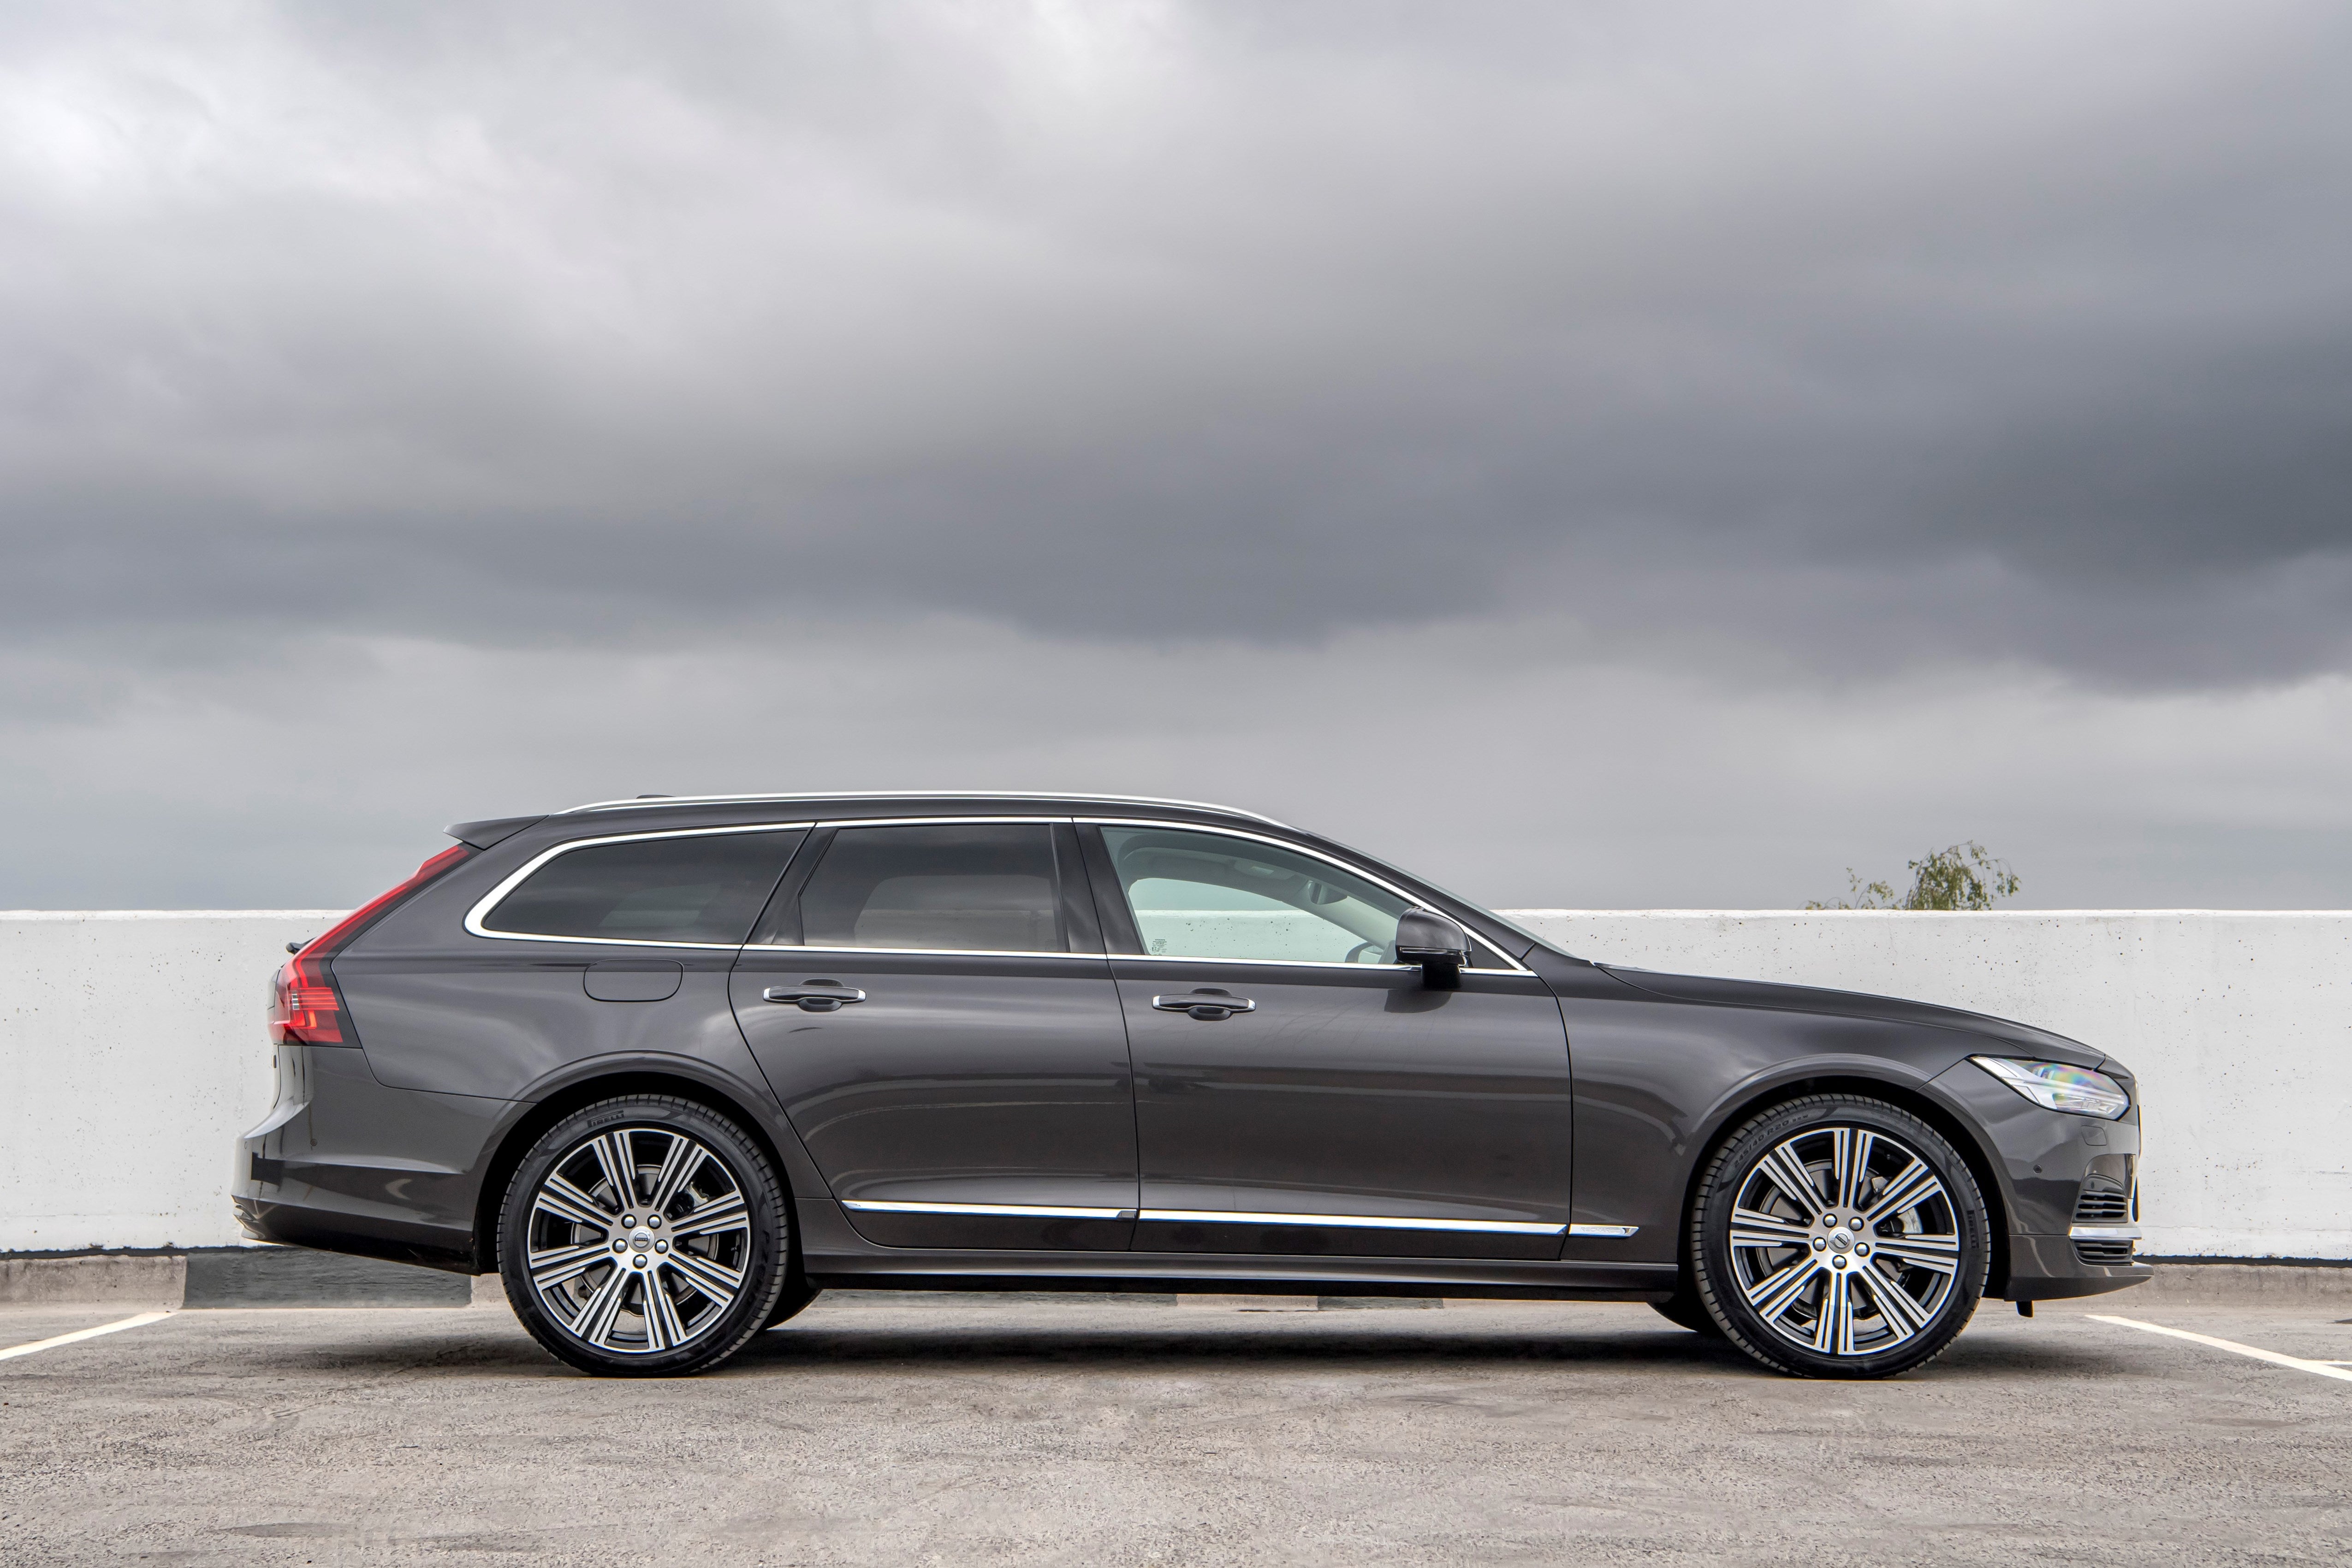 The V90 is very much the Keir Starmer of the car world